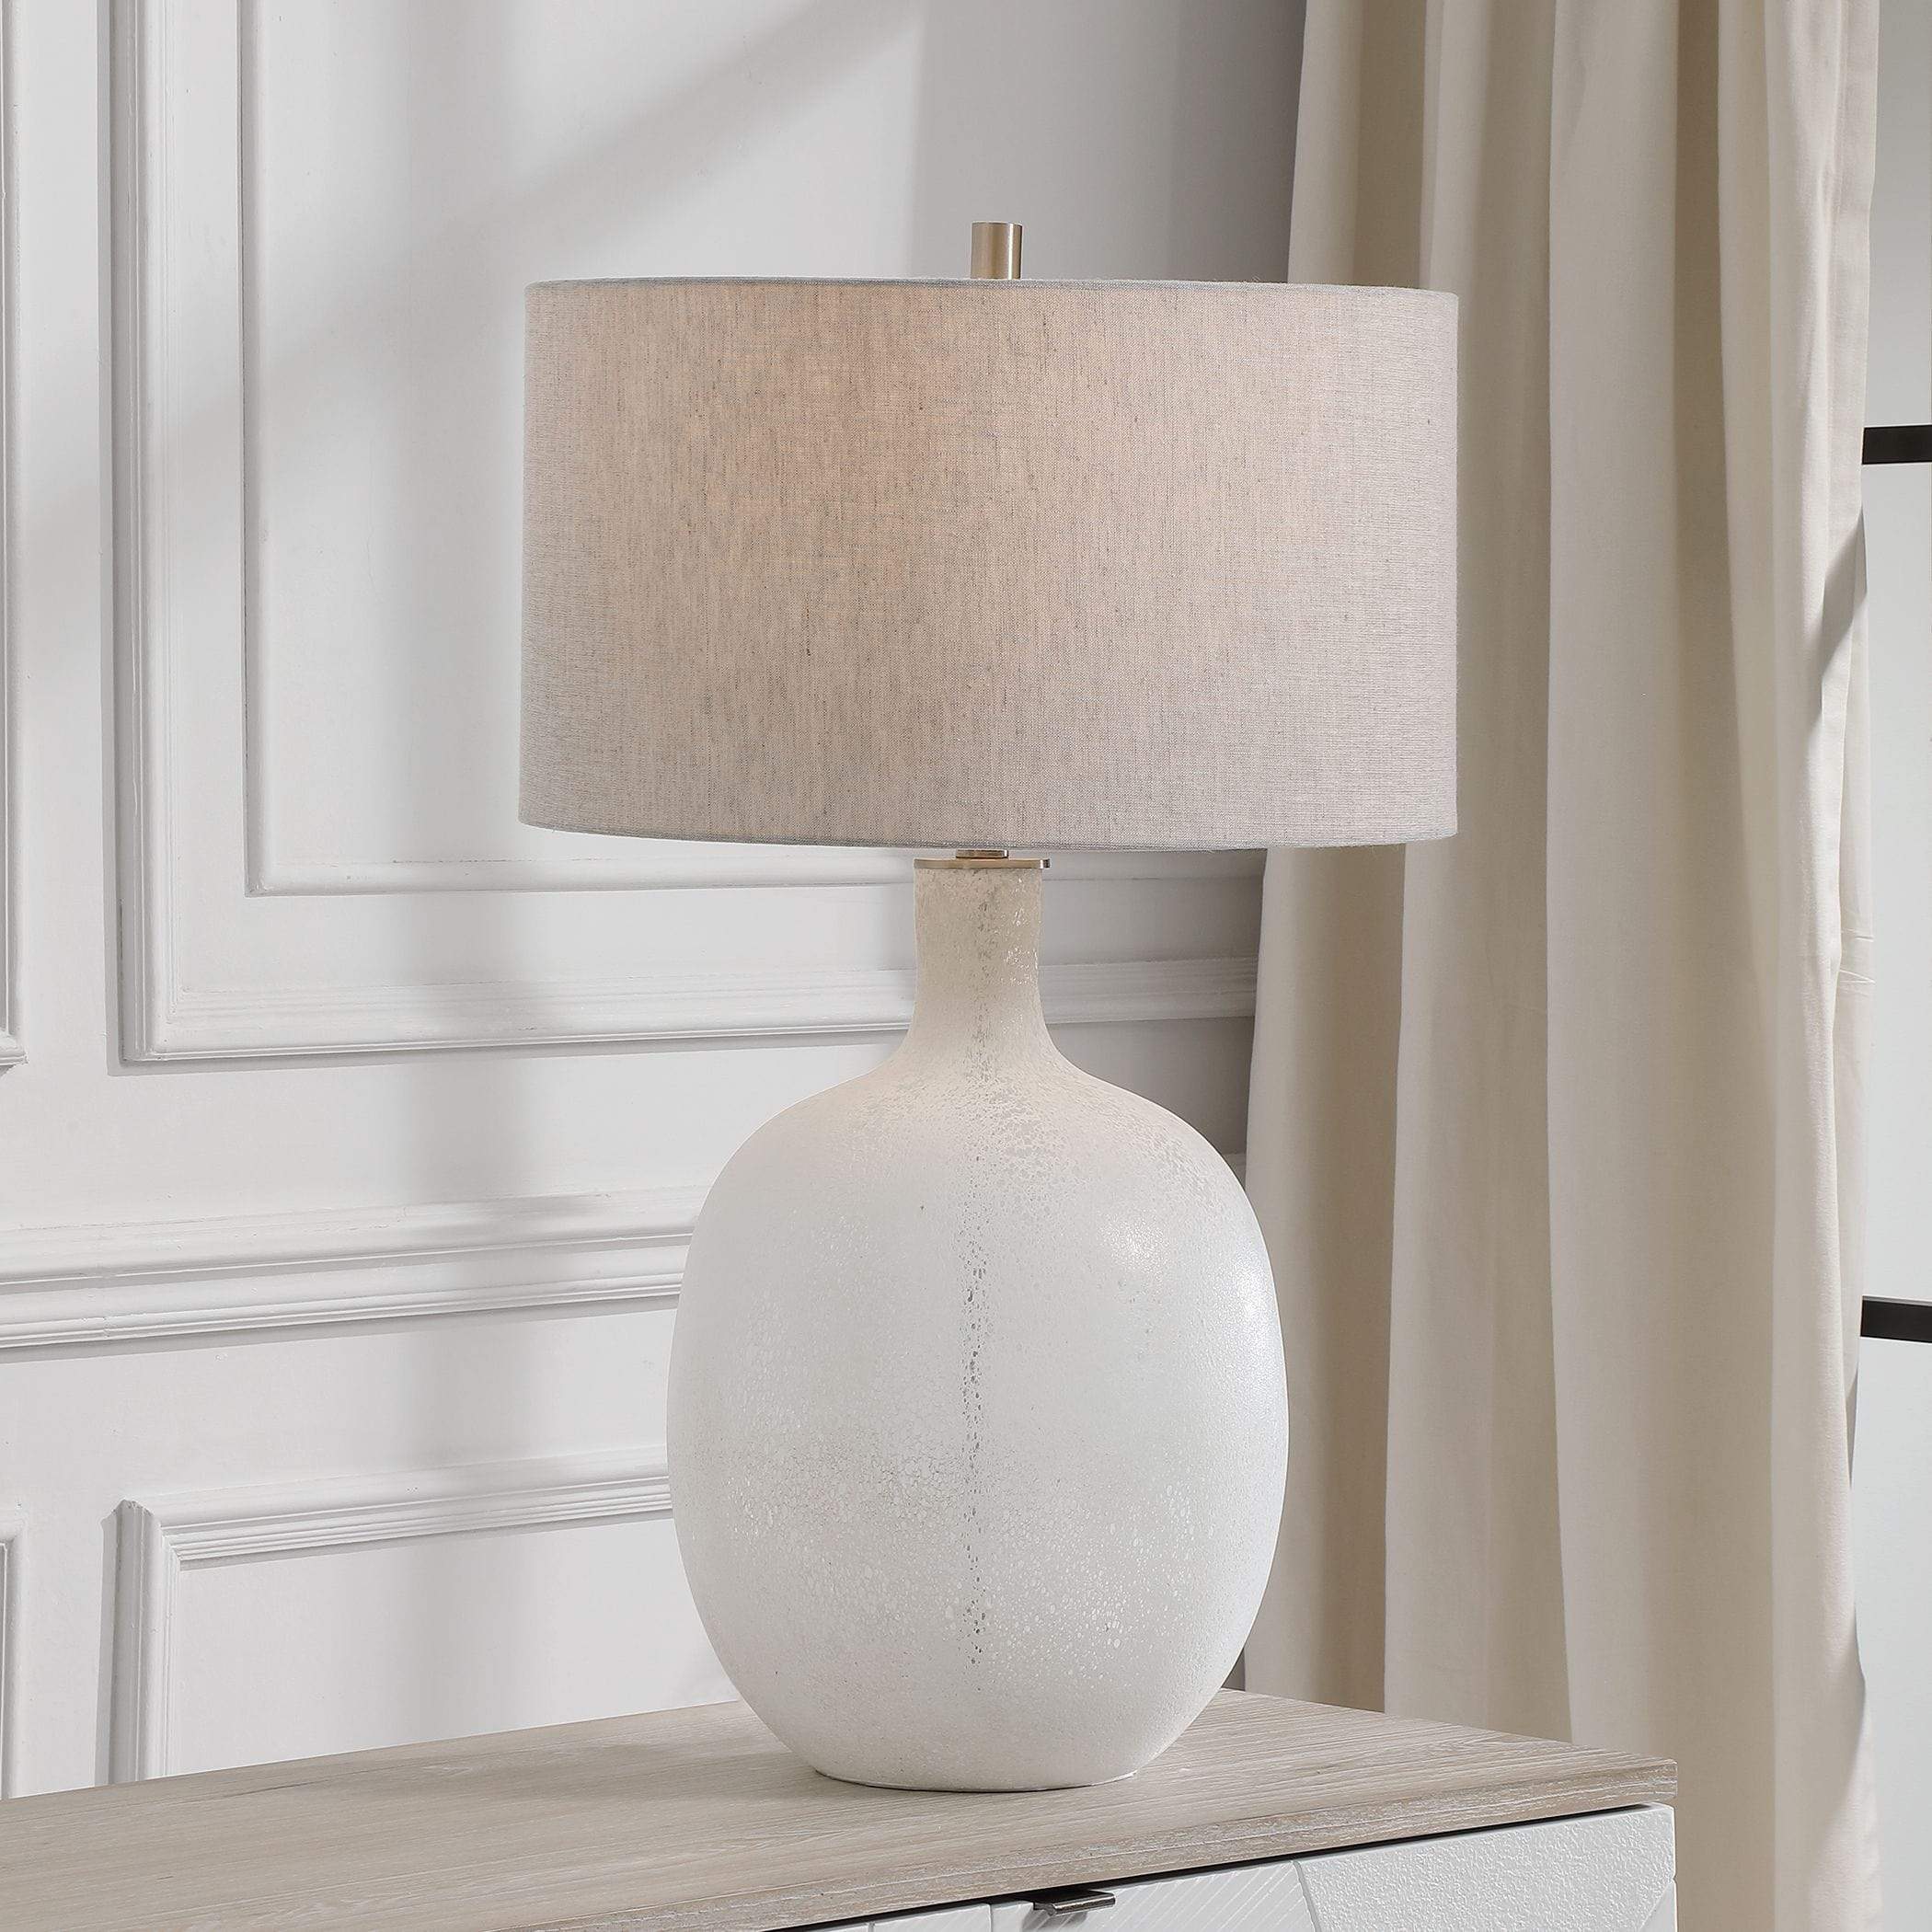 Whiteout Table Lamp Uttermost